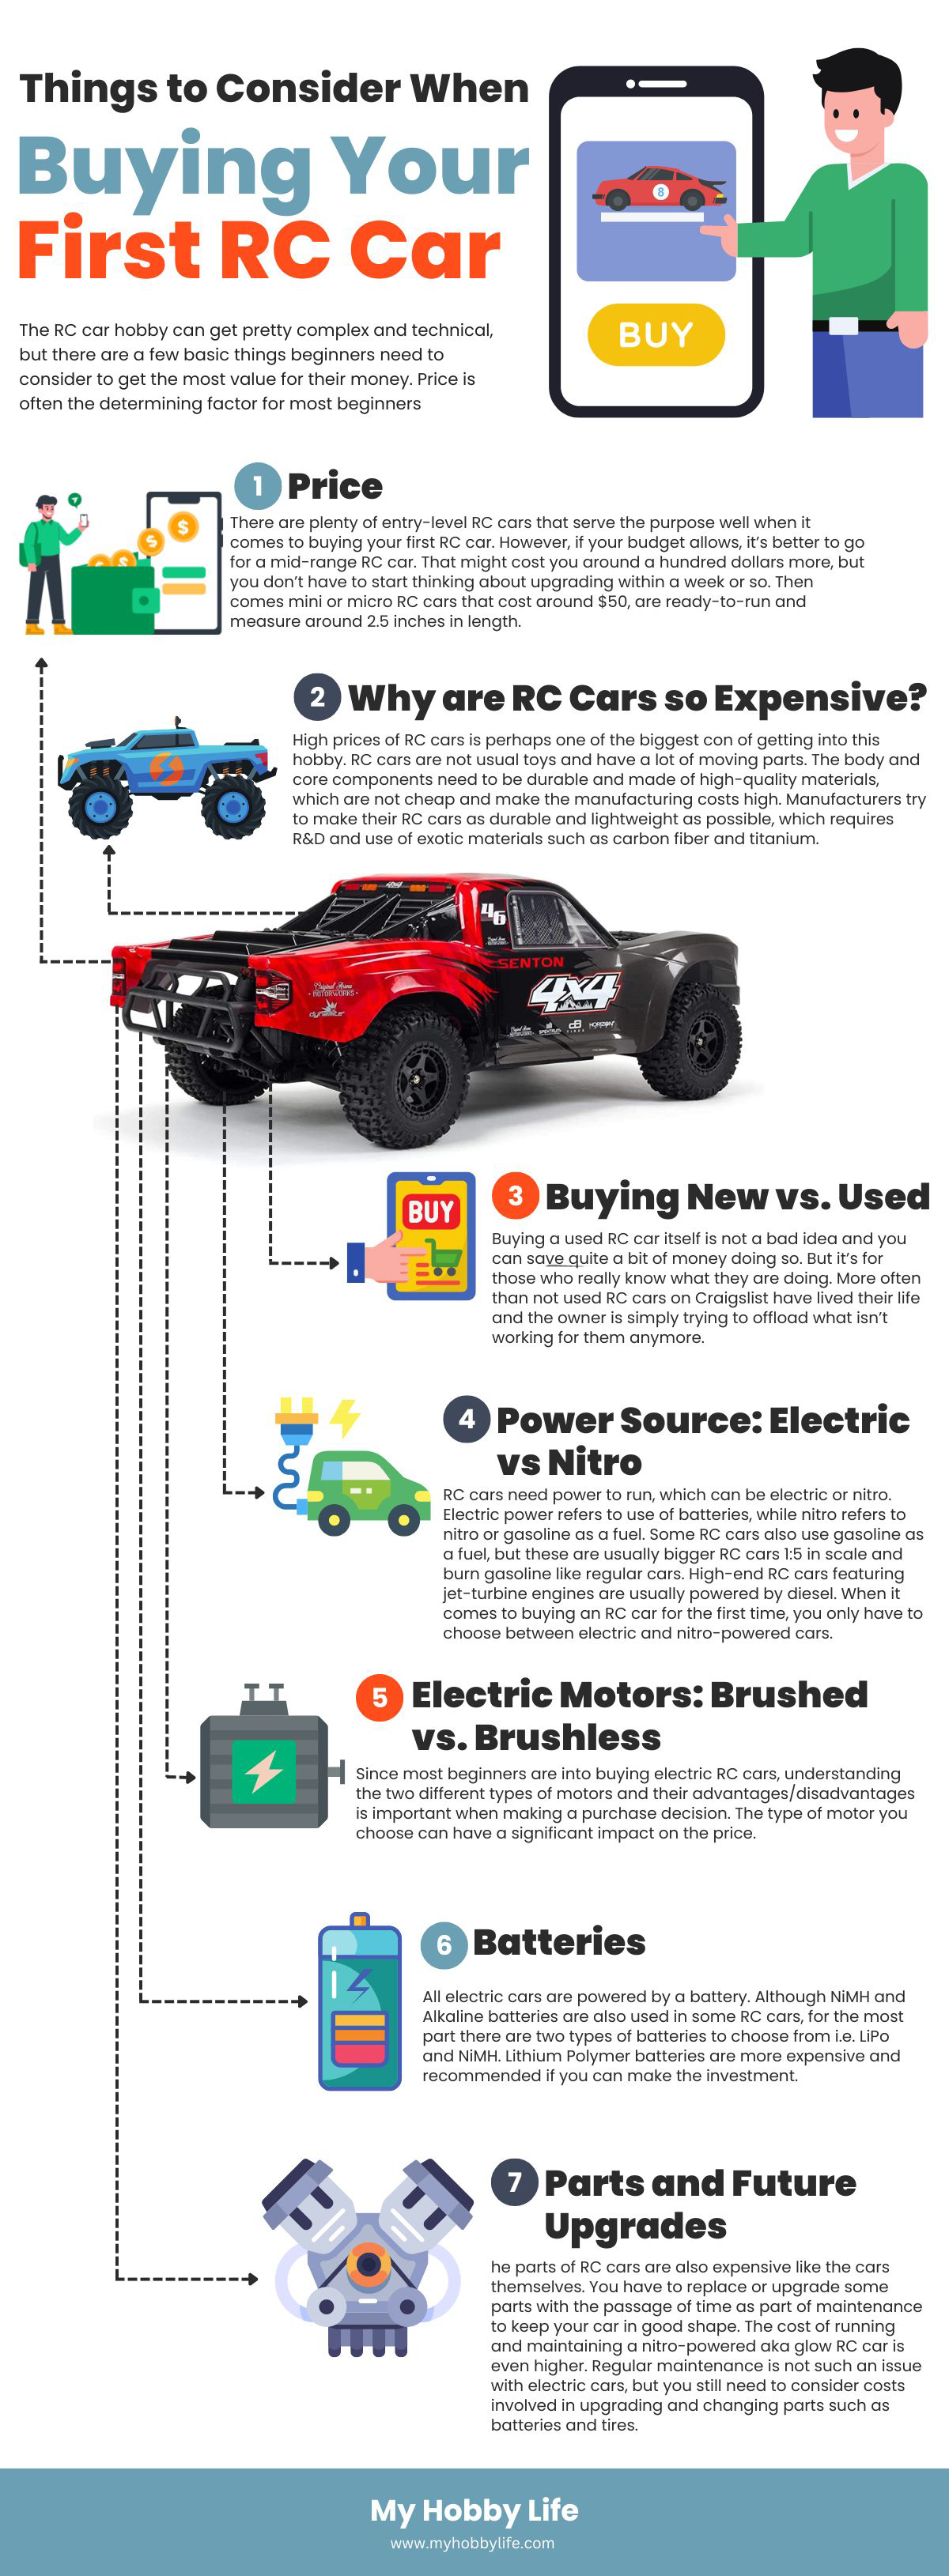 Things to Consider When Buying Your First RC Car